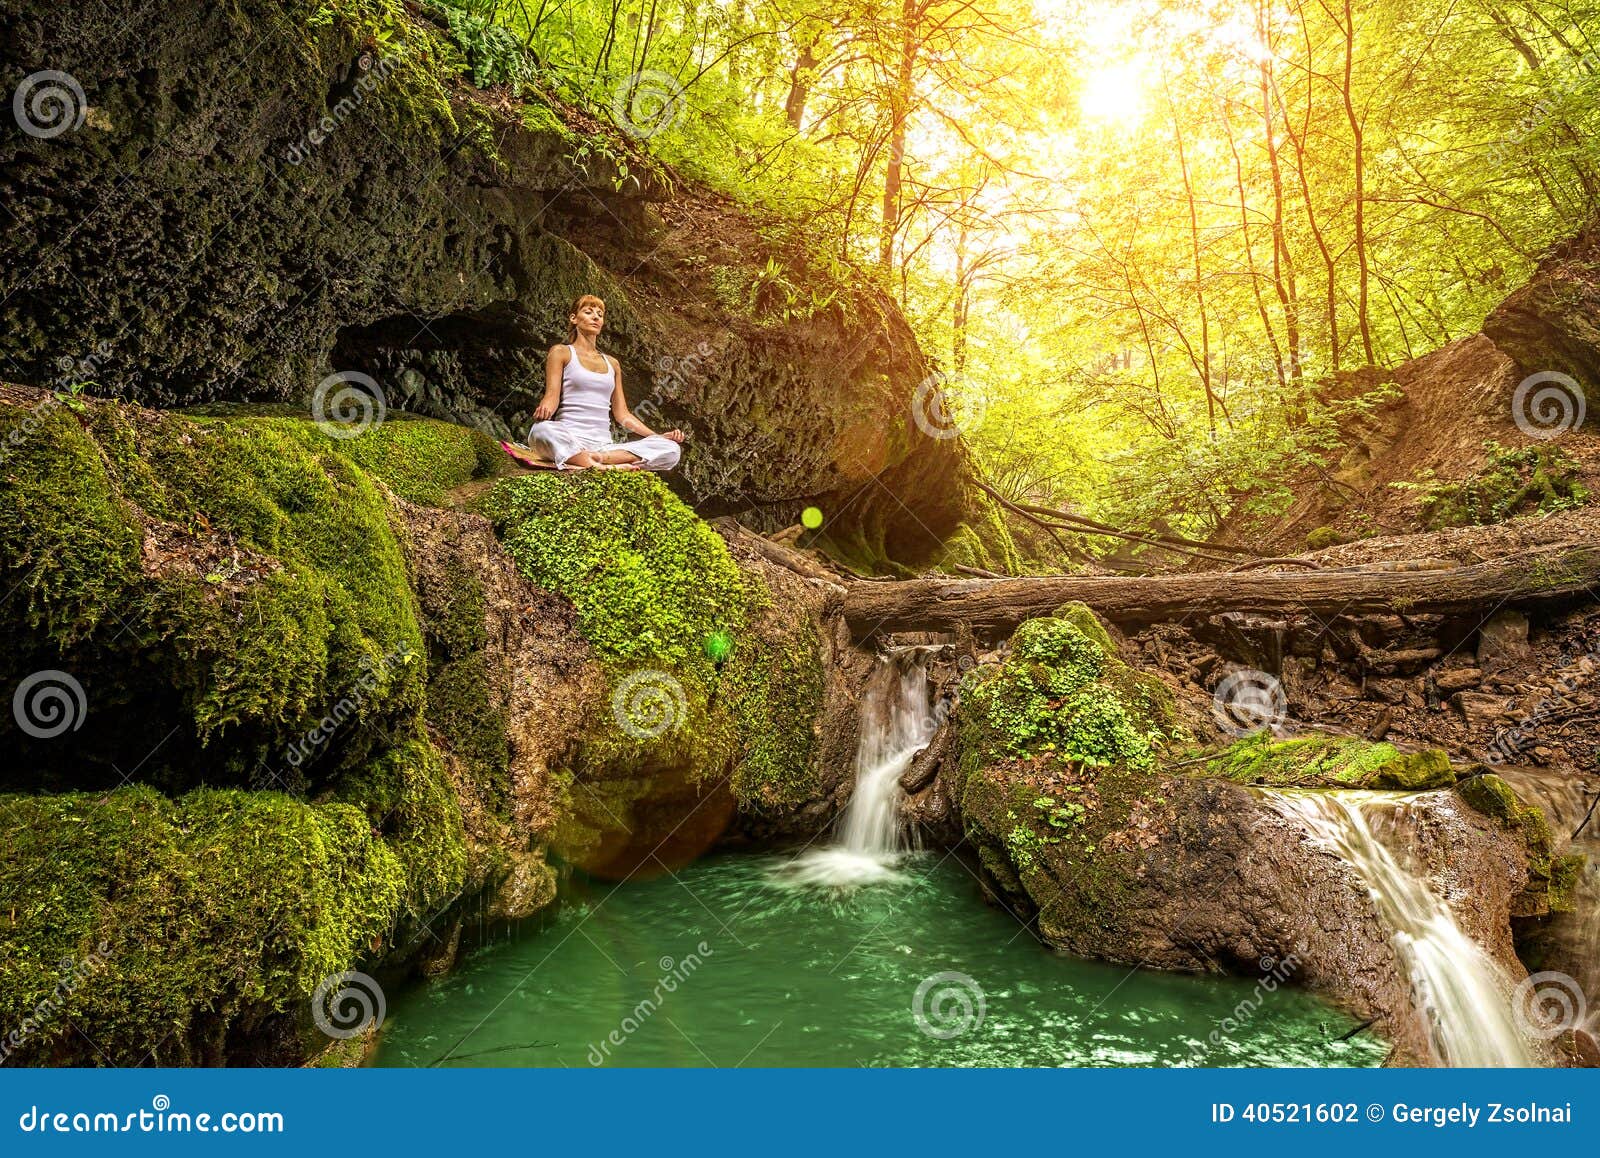 relaxation in forest at the waterfall. ardha padmasana pose